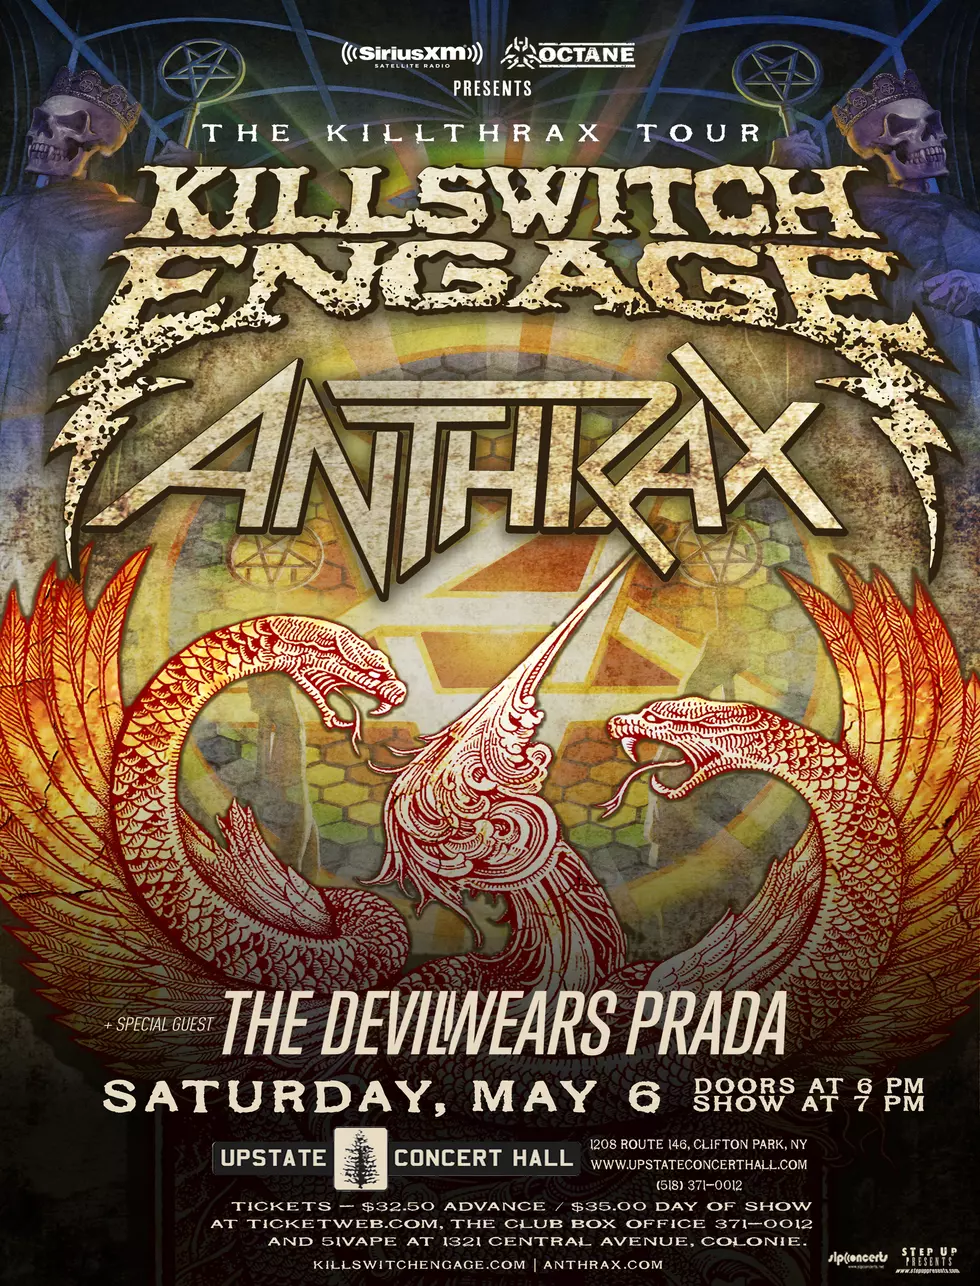 Q103 Welcomes Killswitch Engage and Anthrax to Upstate Concert Hall